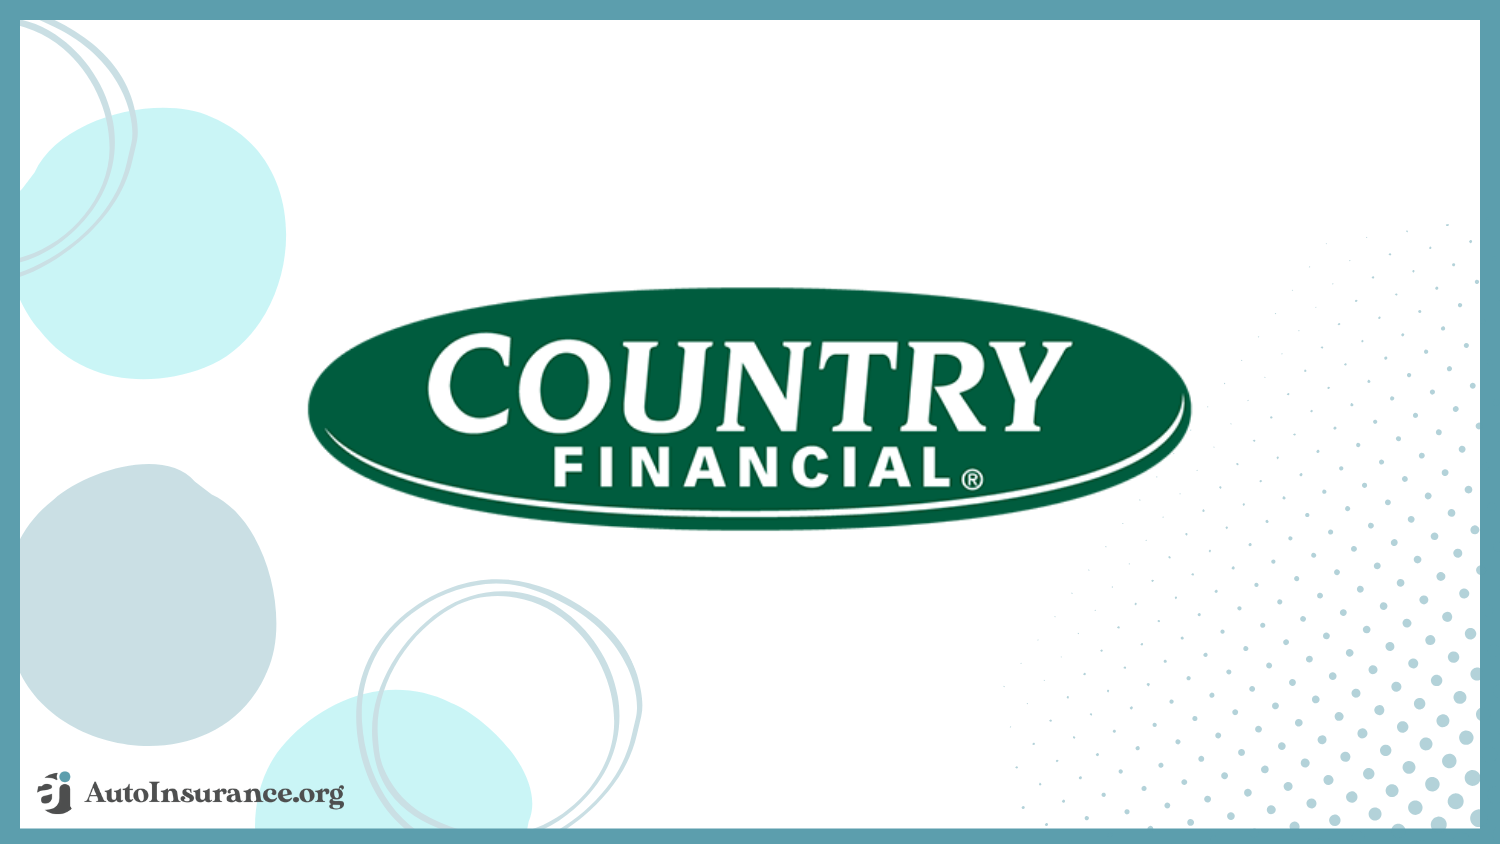 Country Financial: Cheap Auto Insurance for Older Vehicles